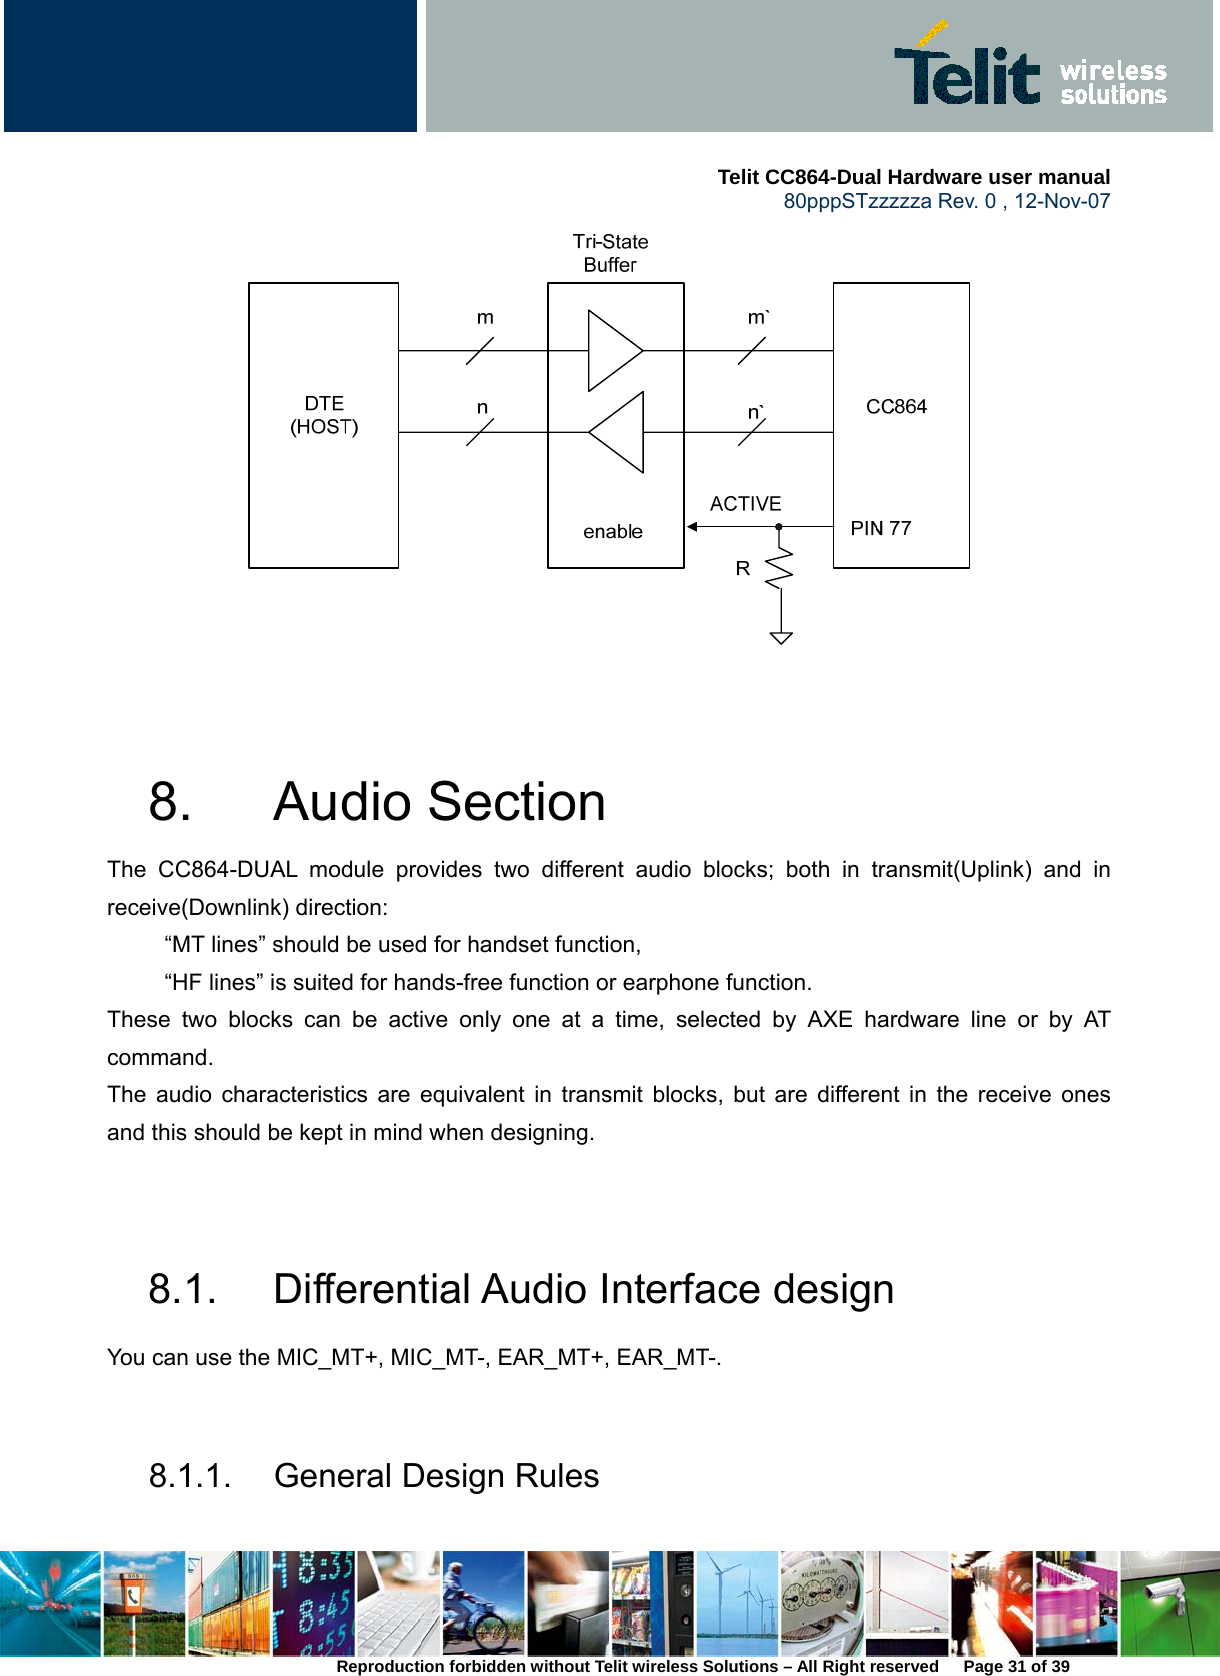     Telit CC864-Dual Hardware user manual   80pppSTzzzzza Rev. 0 , 12-Nov-07 Reproduction forbidden without Telit wireless Solutions – All Right reserved      Page 31 of 39    8. Audio Section  The CC864-DUAL module provides two different audio blocks; both in transmit(Uplink) and in receive(Downlink) direction:             “MT lines” should be used for handset function,           “HF lines” is suited for hands-free function or earphone function. These two blocks can be active only one at a time, selected by AXE hardware line or by AT command. The audio characteristics are equivalent in transmit blocks, but are different in the receive ones and this should be kept in mind when designing.   8.1.  Differential Audio Interface design You can use the MIC_MT+, MIC_MT-, EAR_MT+, EAR_MT-.    8.1.1. General Design Rules 